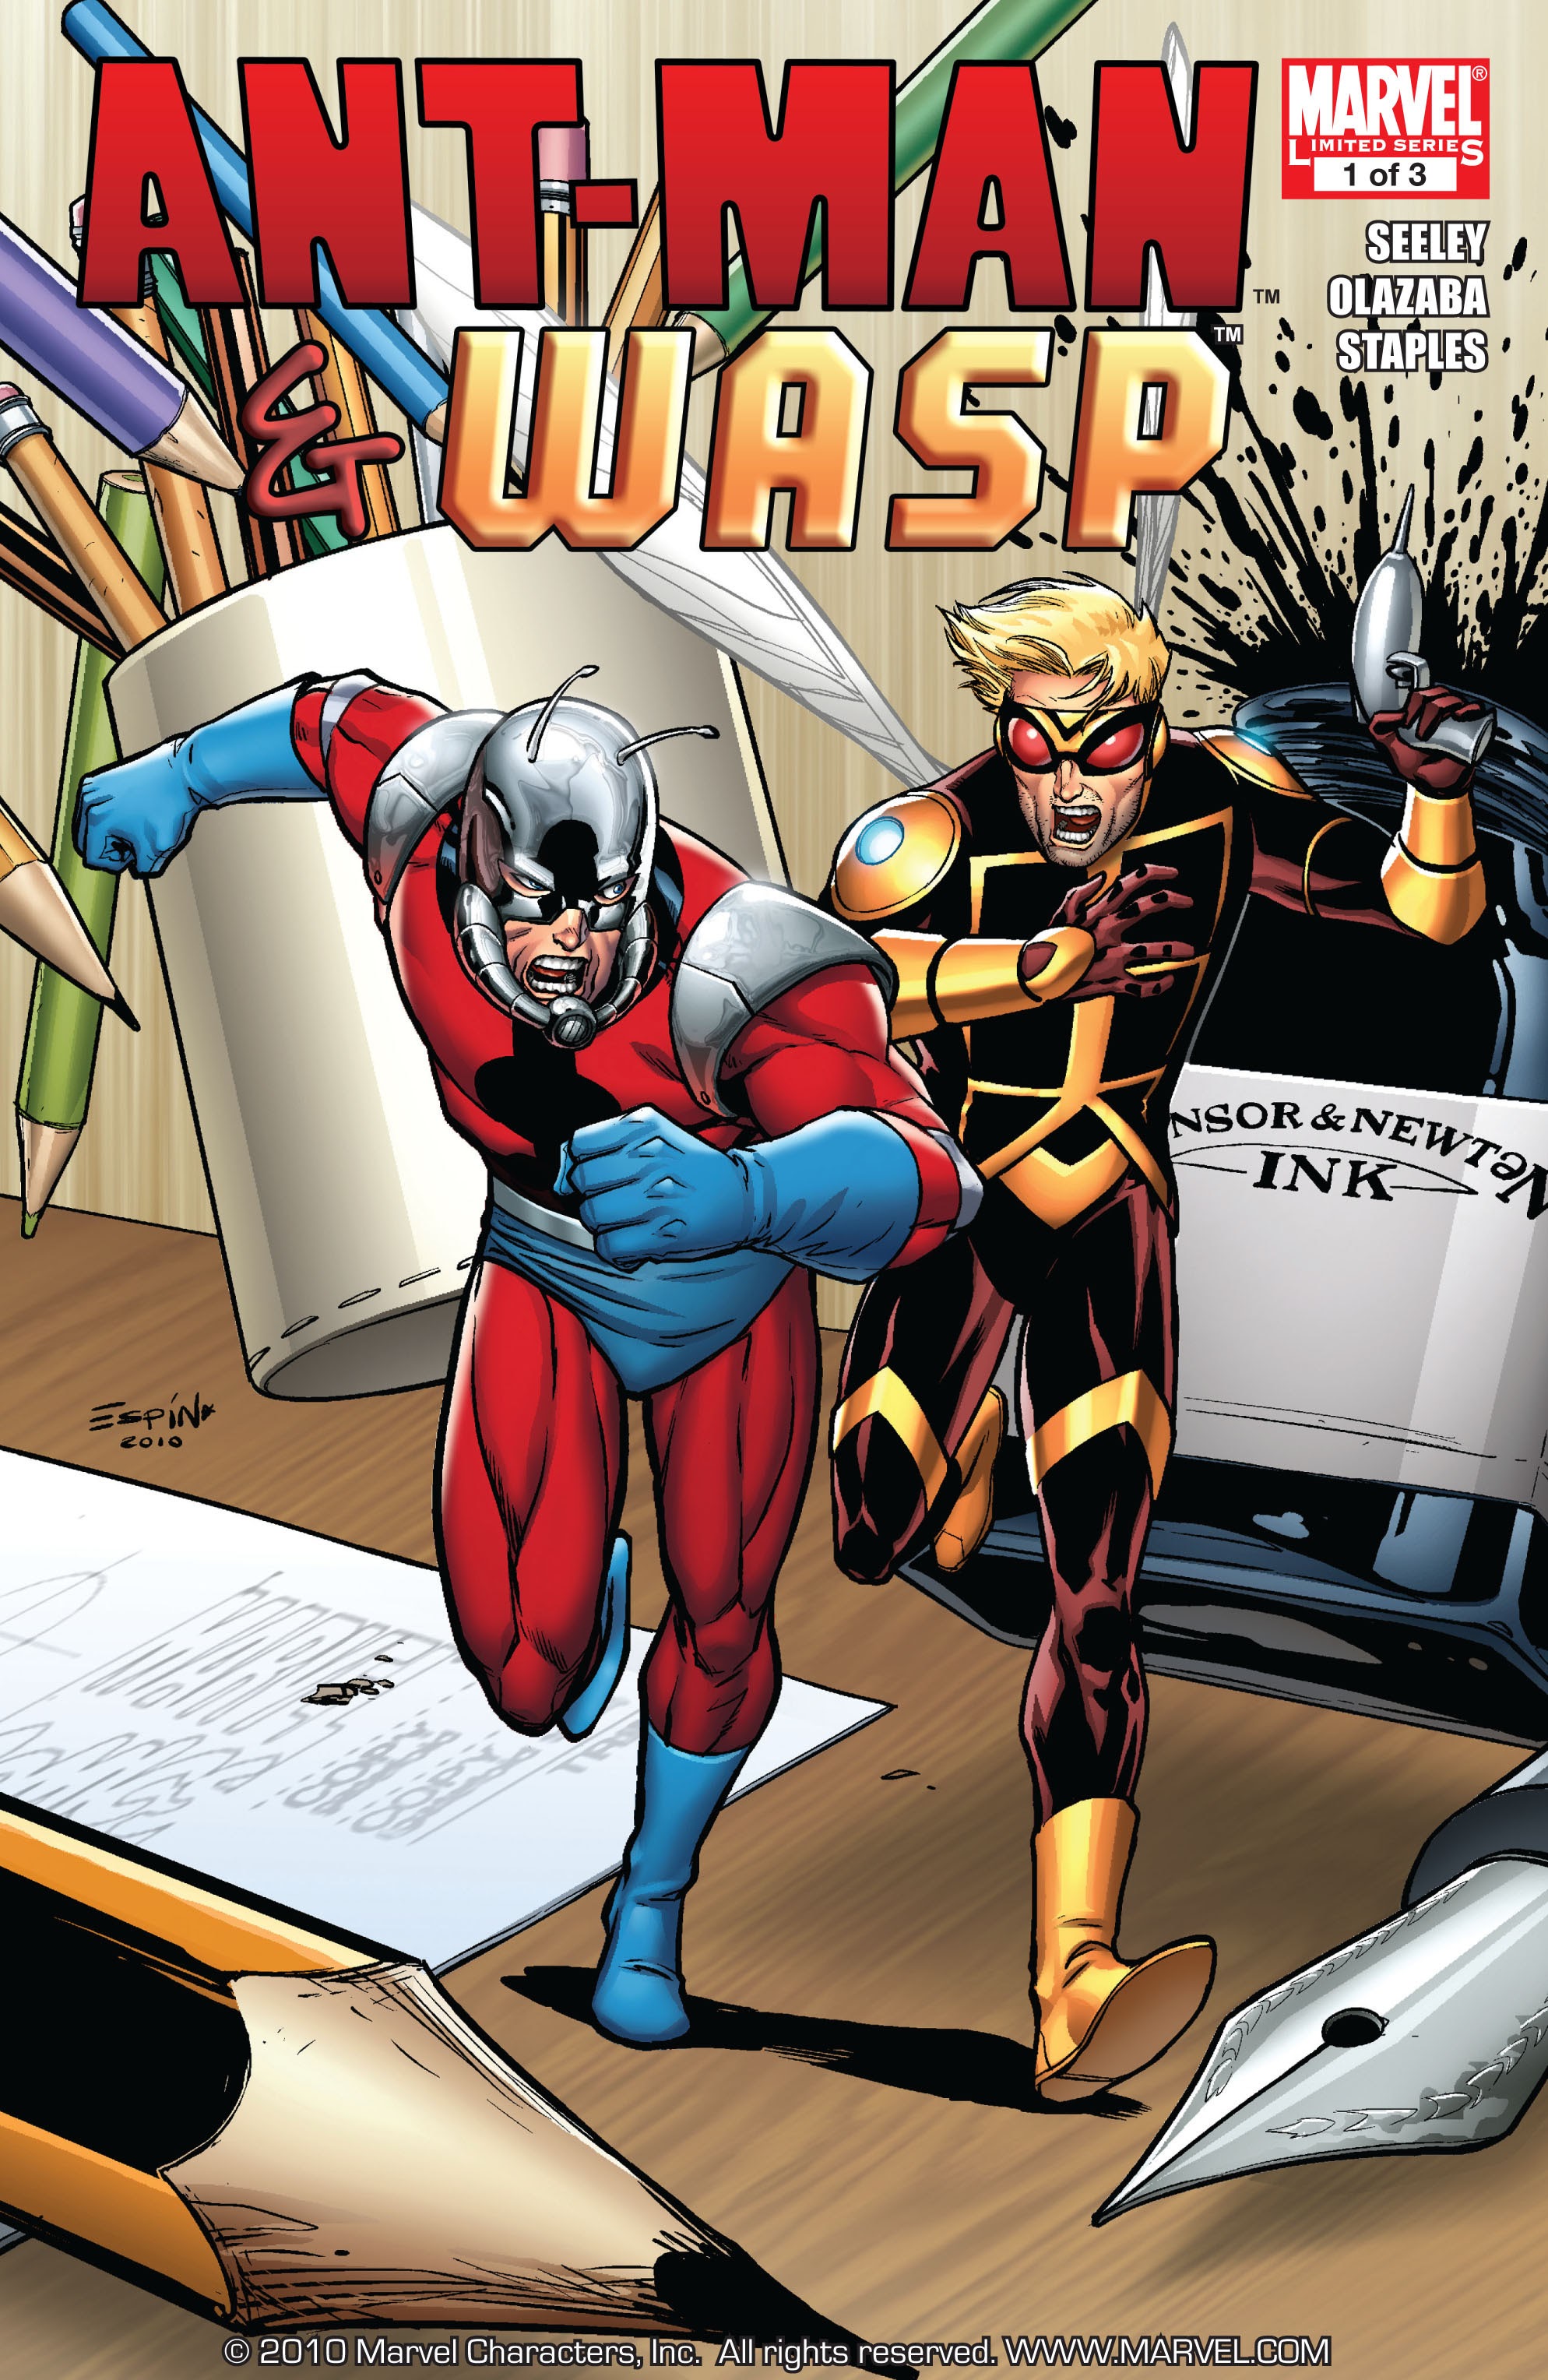 Ant Man Wasp Issue 1 | Read Ant Man Wasp Issue 1 comic online in high  quality. Read Full Comic online for free - Read comics online in high  quality .| READ COMIC ONLINE